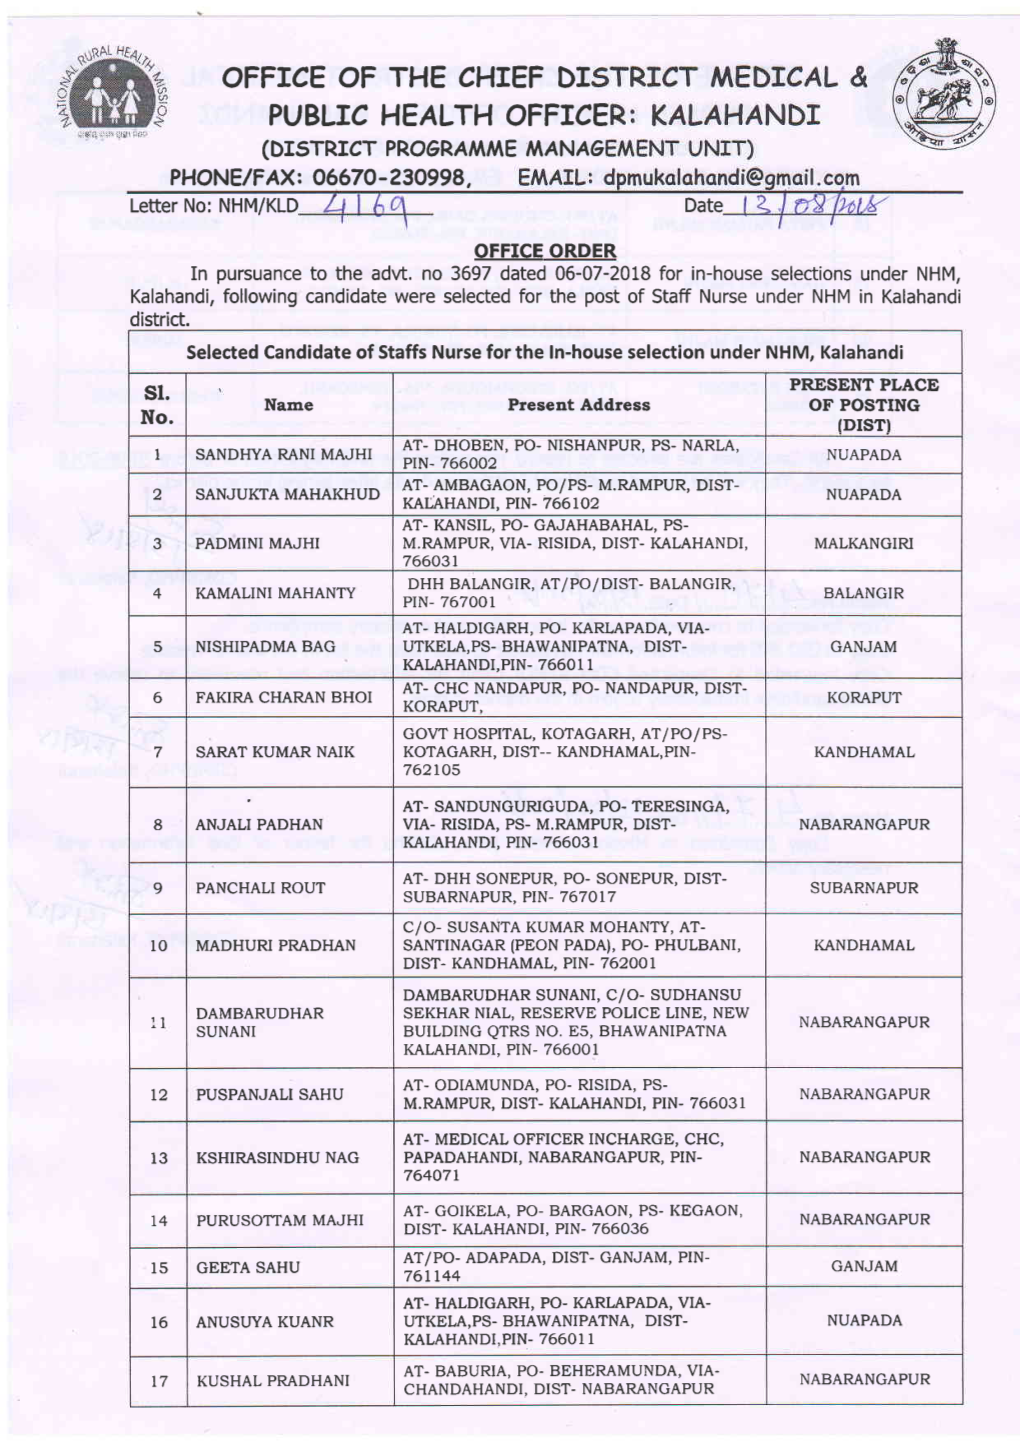 OFFICE of the CHIEF DI PUBLIC HEALTH OFFICE (DISTRICT PROORA,VIME T'^ANAG PHONE/F Axz 06670 - 230998, Letter No: NHM/KLD Date